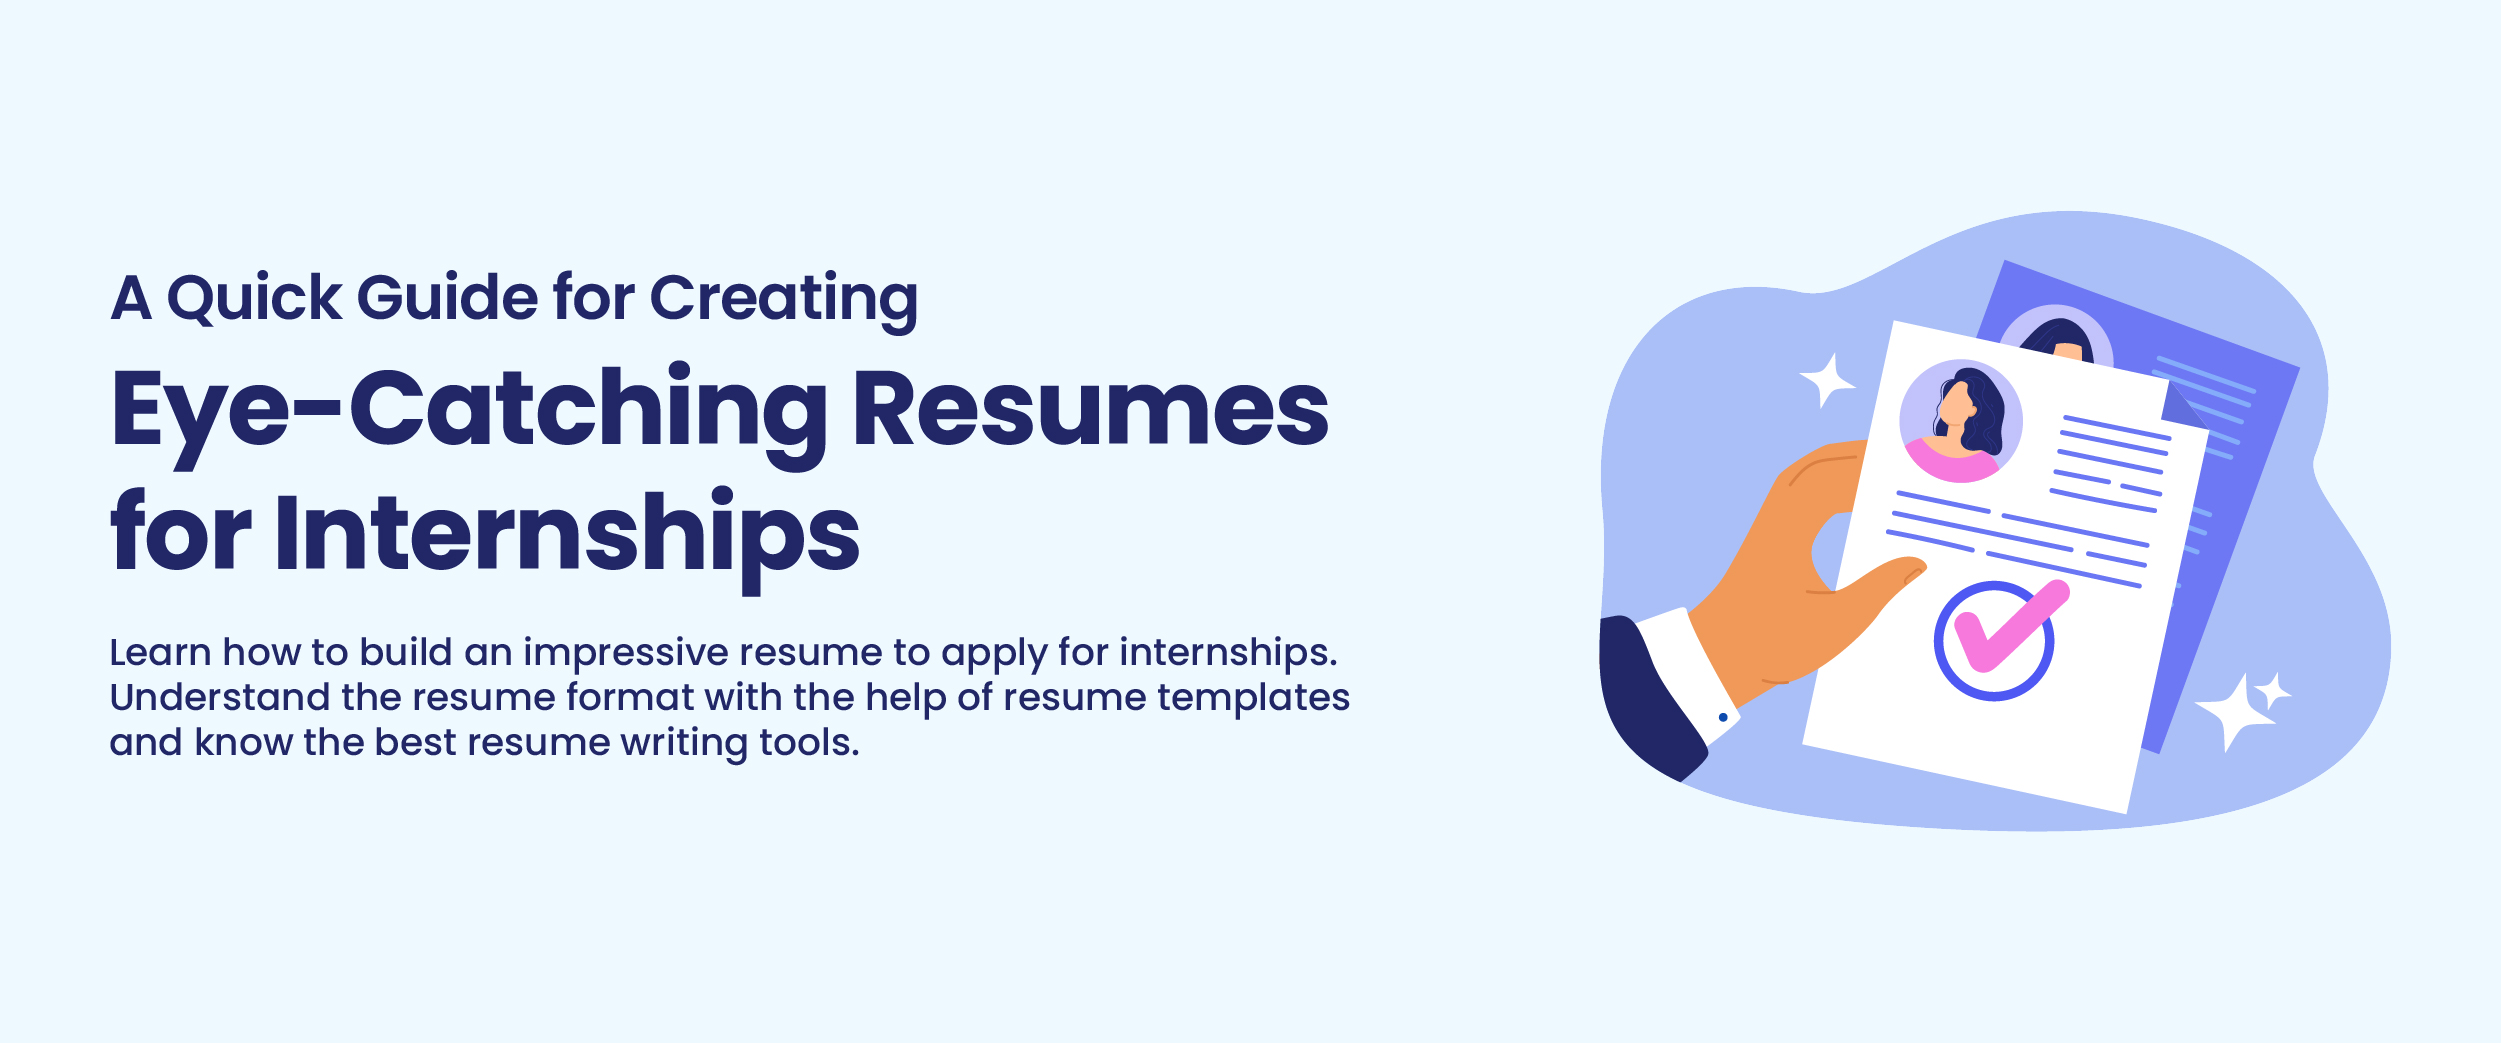 A Quick Guide for Creating Eye-Catching Resumes for Internships